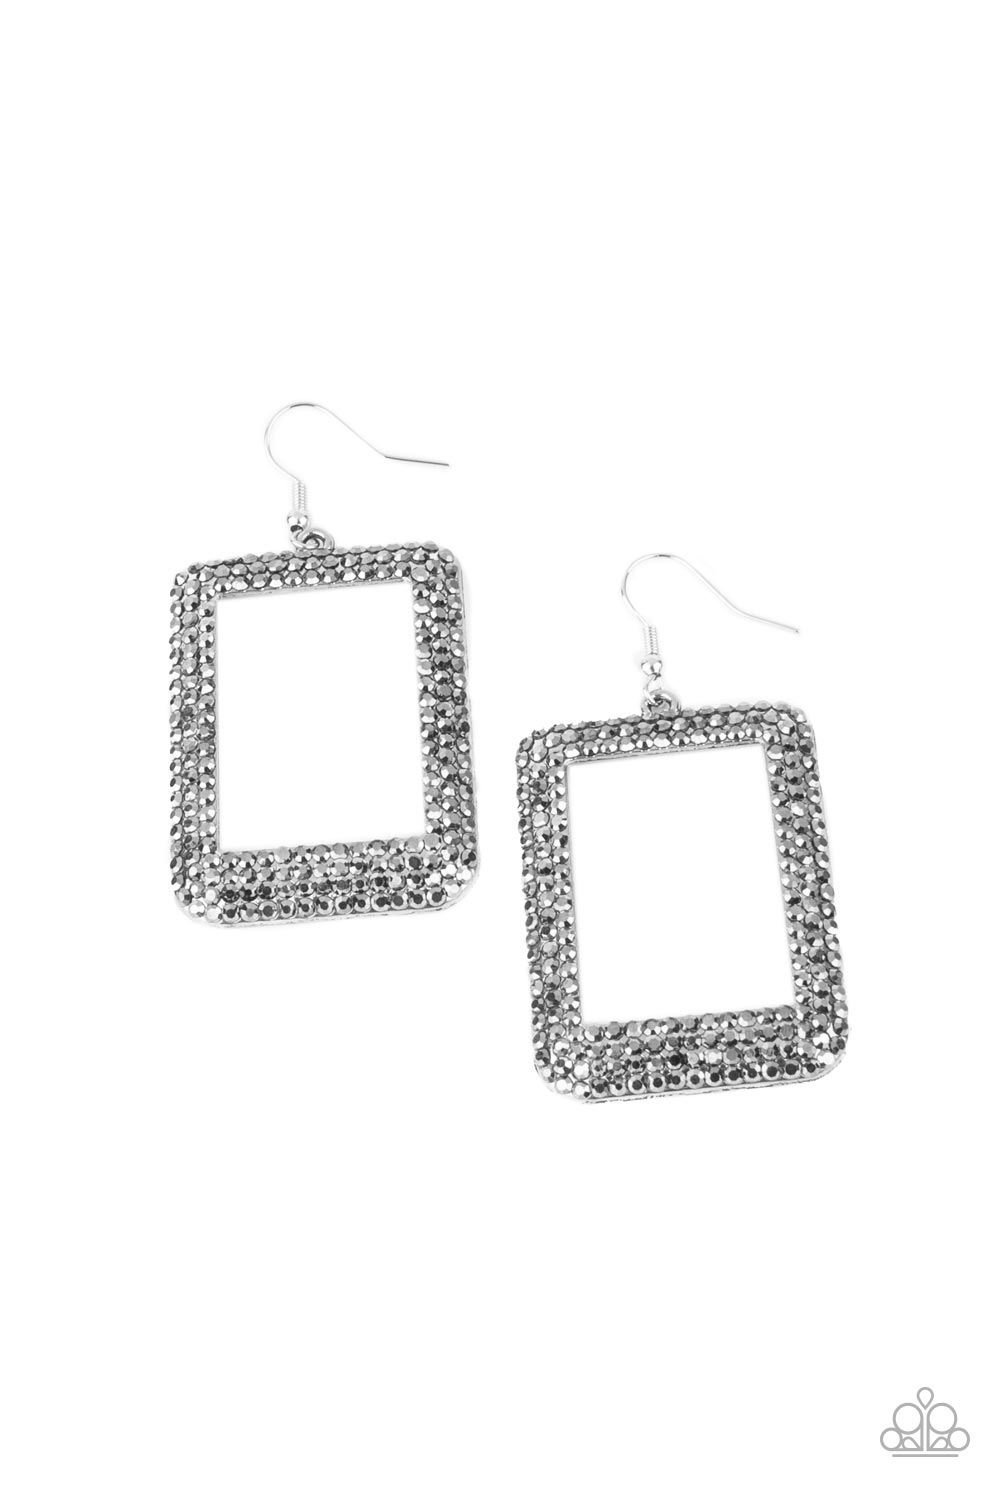 Paparazzi World FRAME-ous - Silver Earrings - A Finishing Touch Jewelry